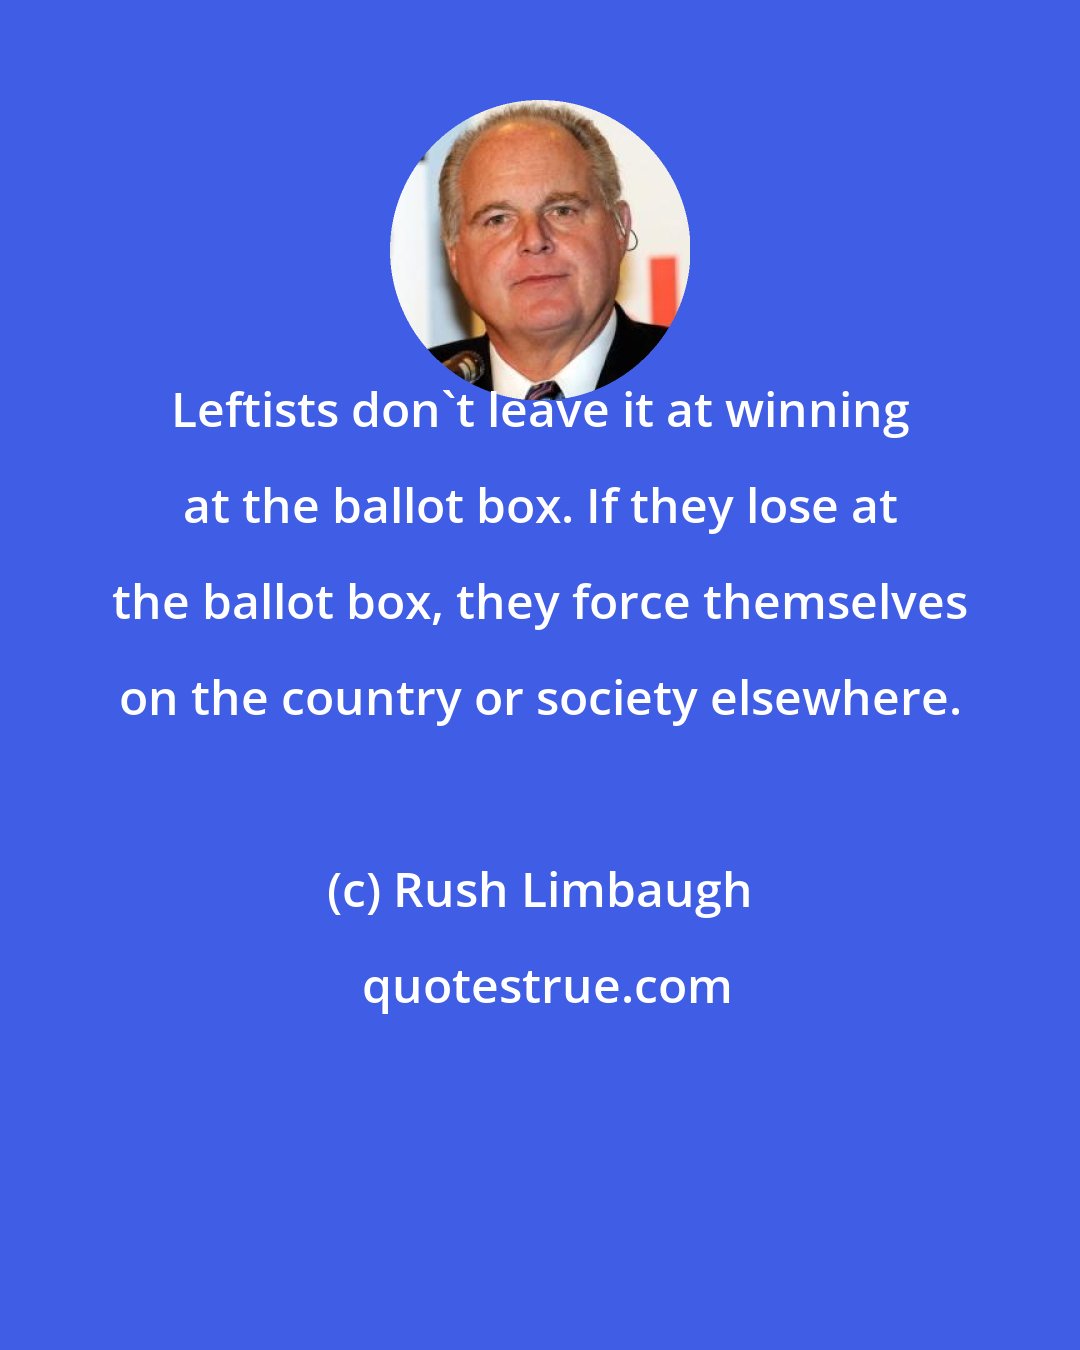 Rush Limbaugh: Leftists don't leave it at winning at the ballot box. If they lose at the ballot box, they force themselves on the country or society elsewhere.